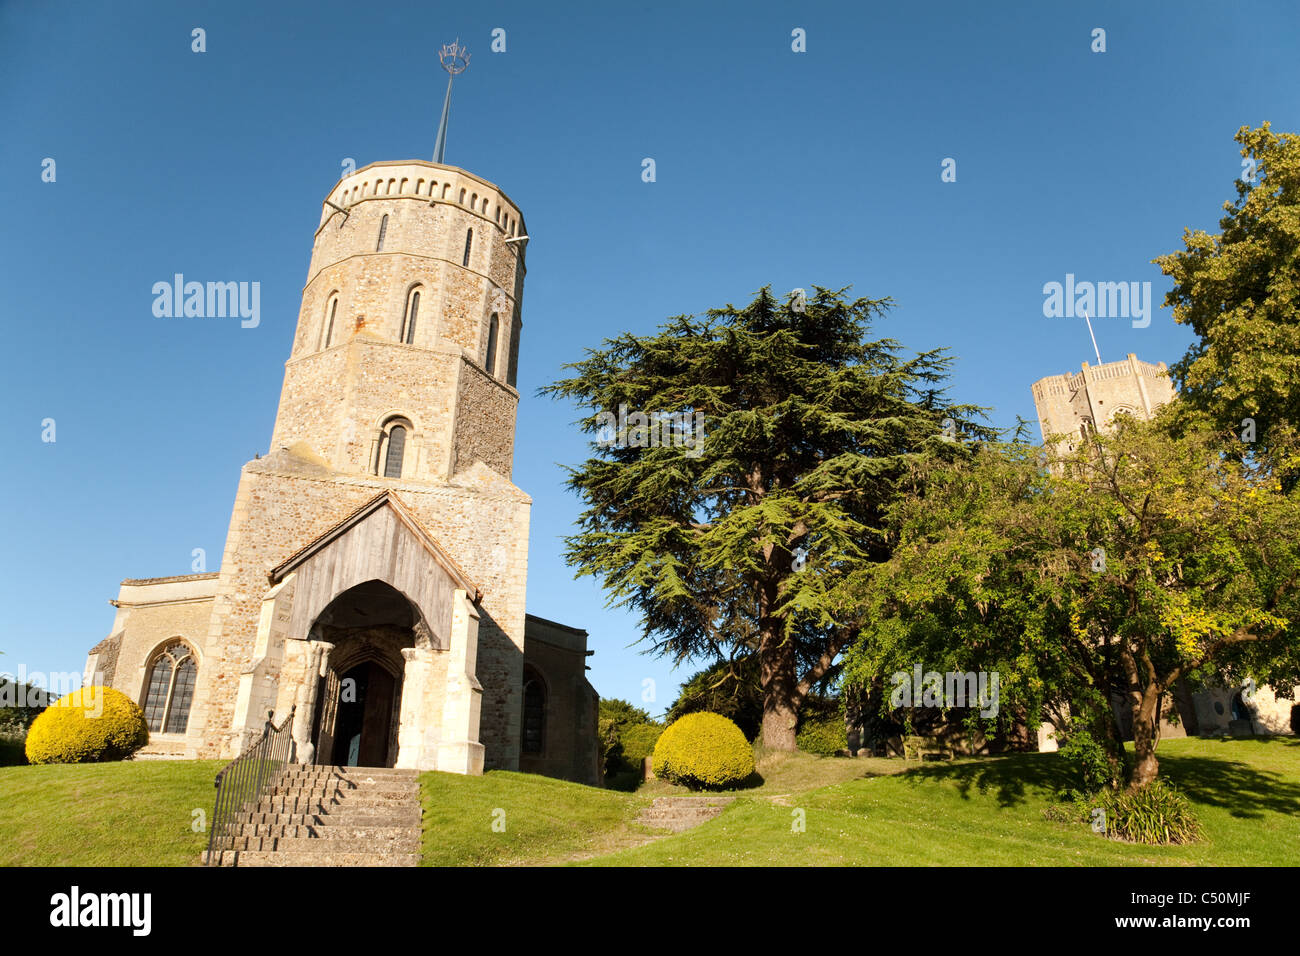 The twin churches of St Mary and Church of St Cyriac and St Julitta, Swaffham Prior village, cambridgeshire UK Stock Photo